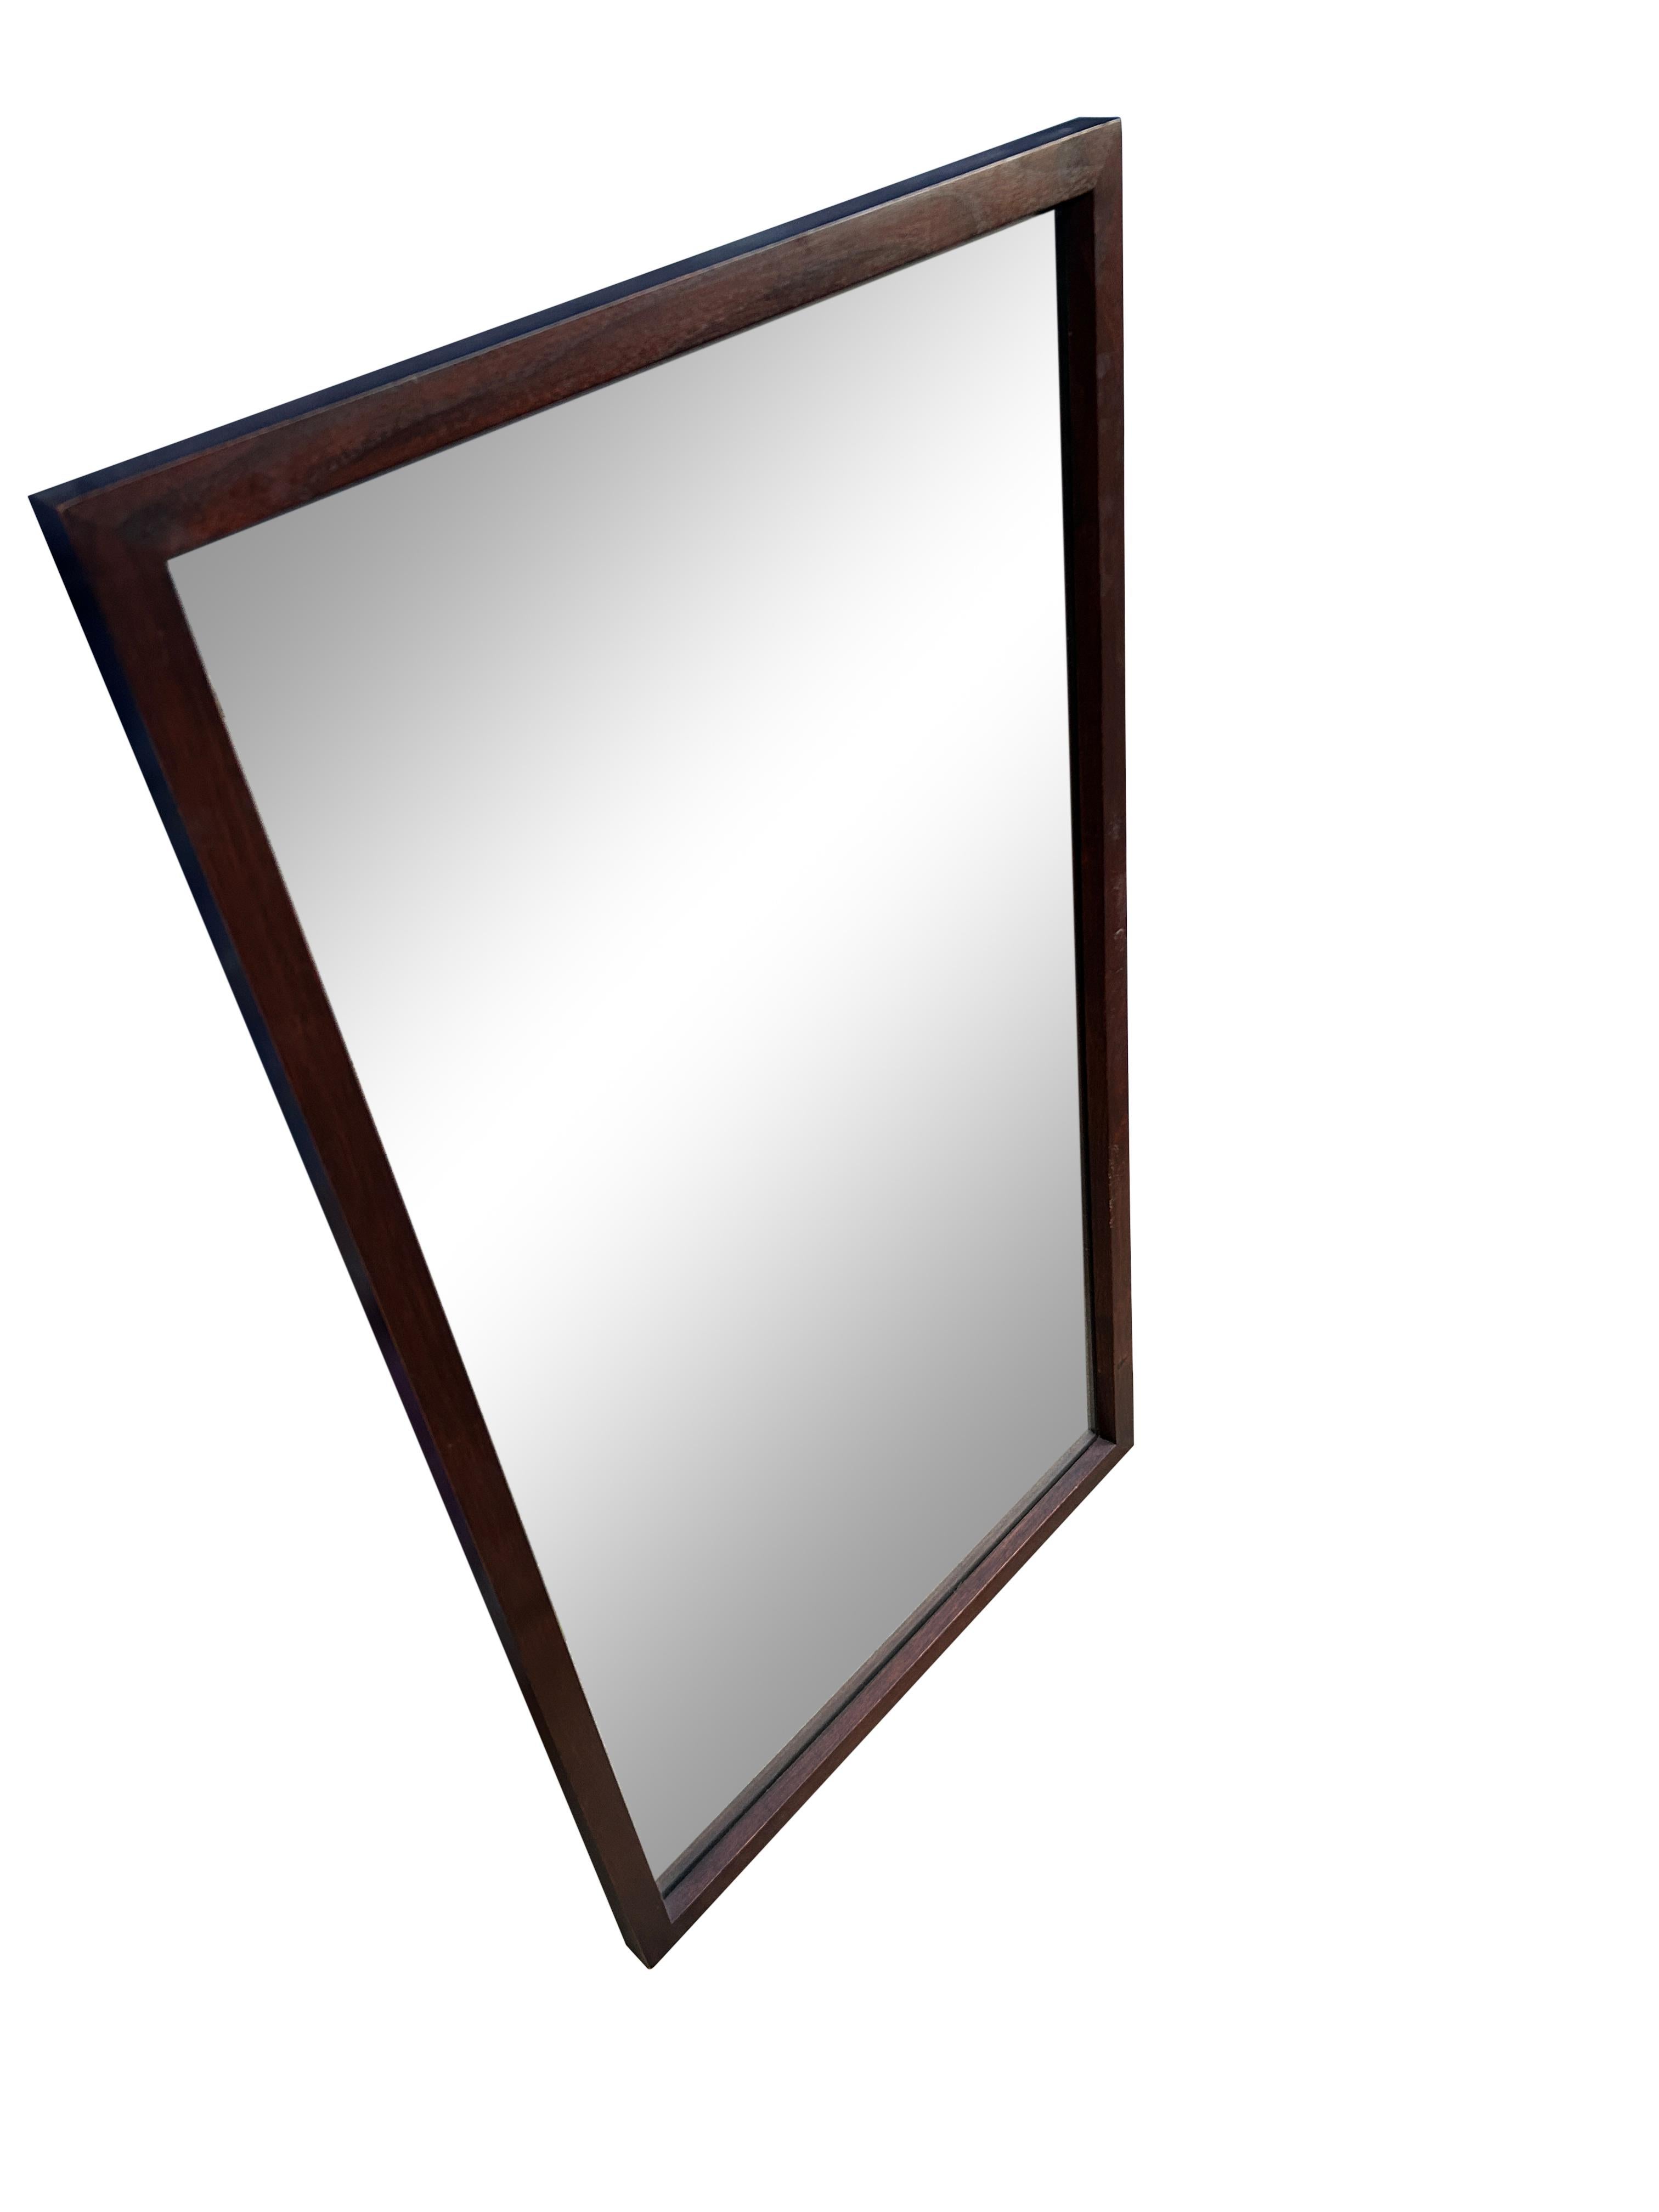 Mid-Century Modern solid walnut framed wall mirror. Currently wired ready for use. Rectangle mirror frame. Wood backing very good construction.

Measures 20” x 36” x 1